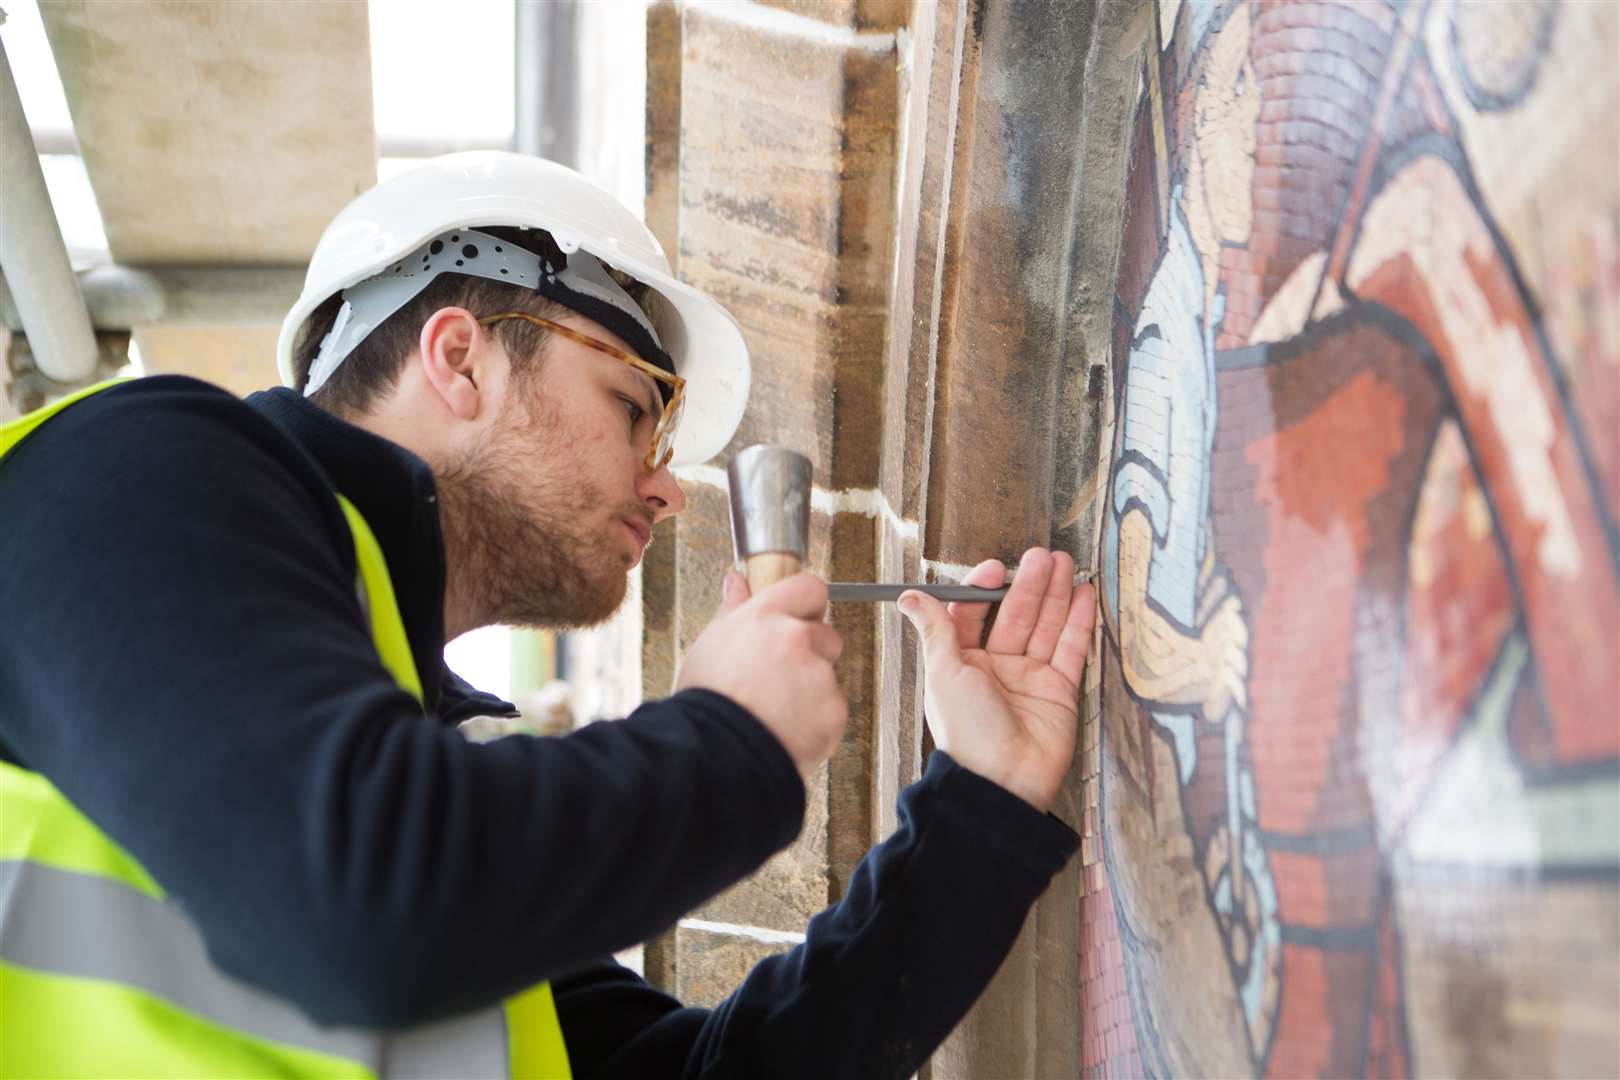 Mosaics returned to the Academy Street building in March 2019.